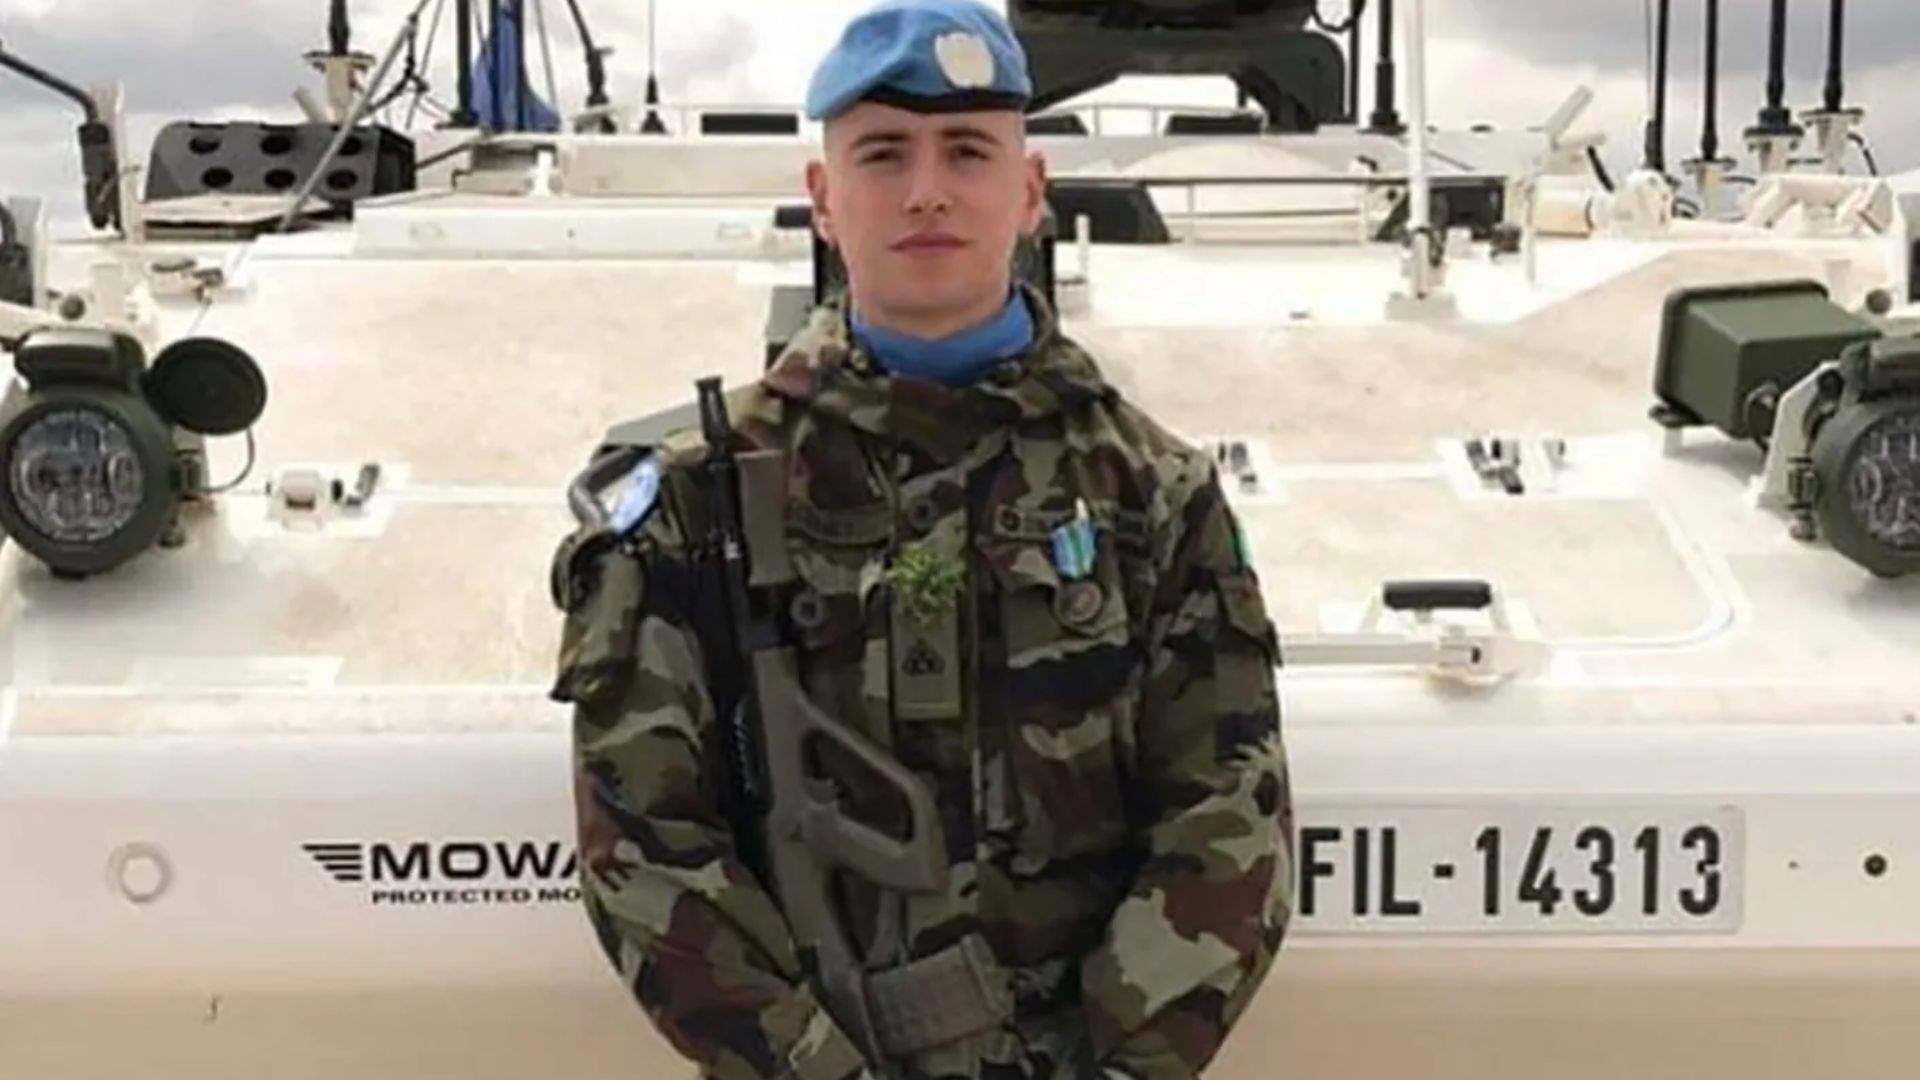 Controversial release: Irish Soldier Sean Rooney&#39;s alleged killer freed amid rising southern tensions